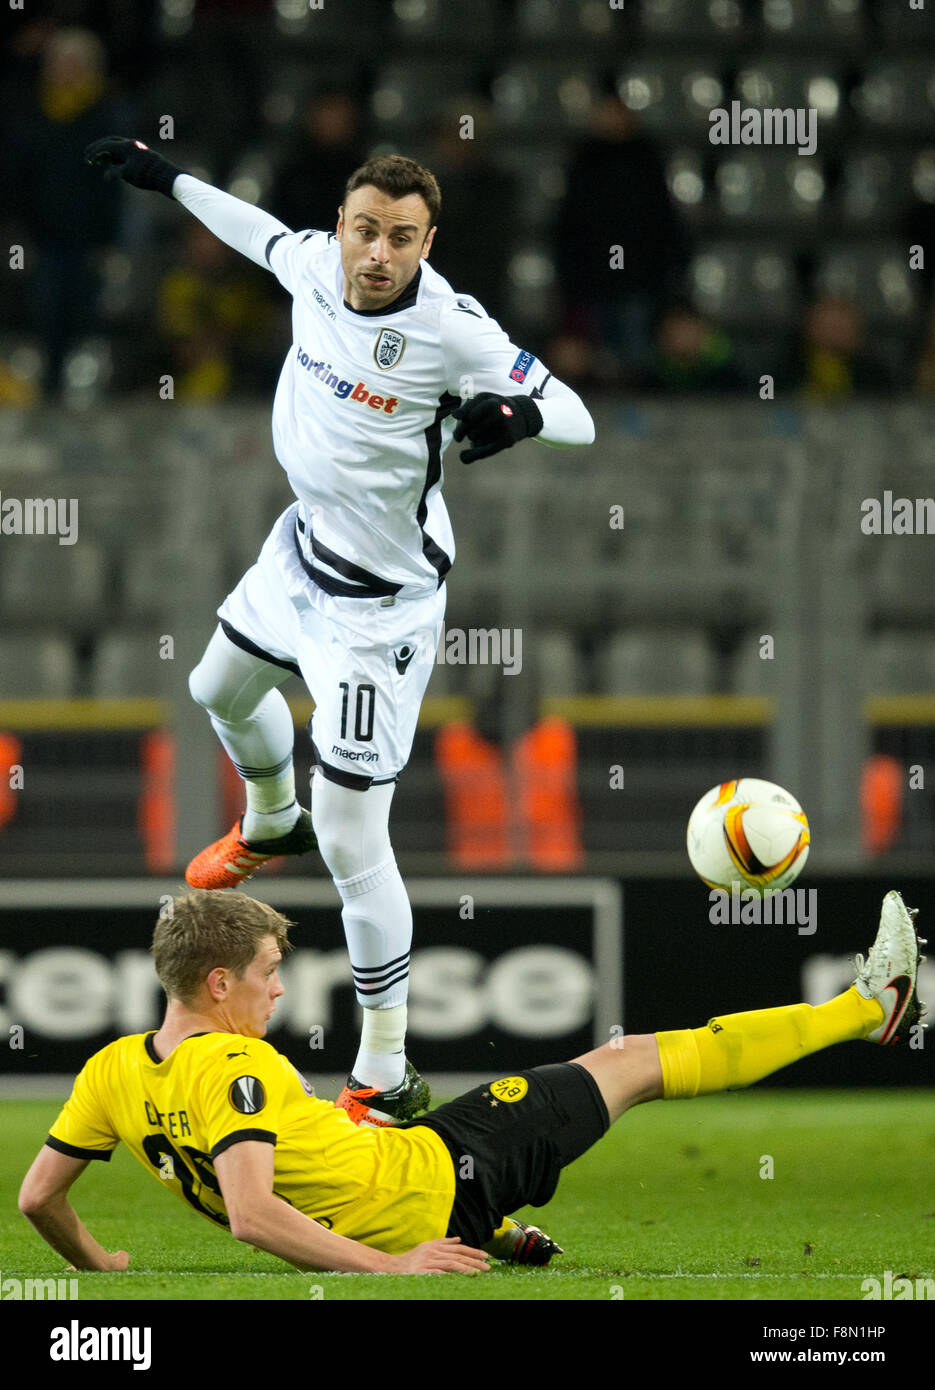 Dortmund, Germany. 10th Dec, 2015. Dortmund's Matthias Ginter (bottom) and PAOK's Dimitar Berbatov compete for the ball during the Europa League Group C football match between Borussia Dortmund and PAOK FC at the Signal Iduna Park in Dortmund, Germany, 10 December 2015. PHOTO: BERND THISSEN/DPA/Alamy Live News Stock Photo